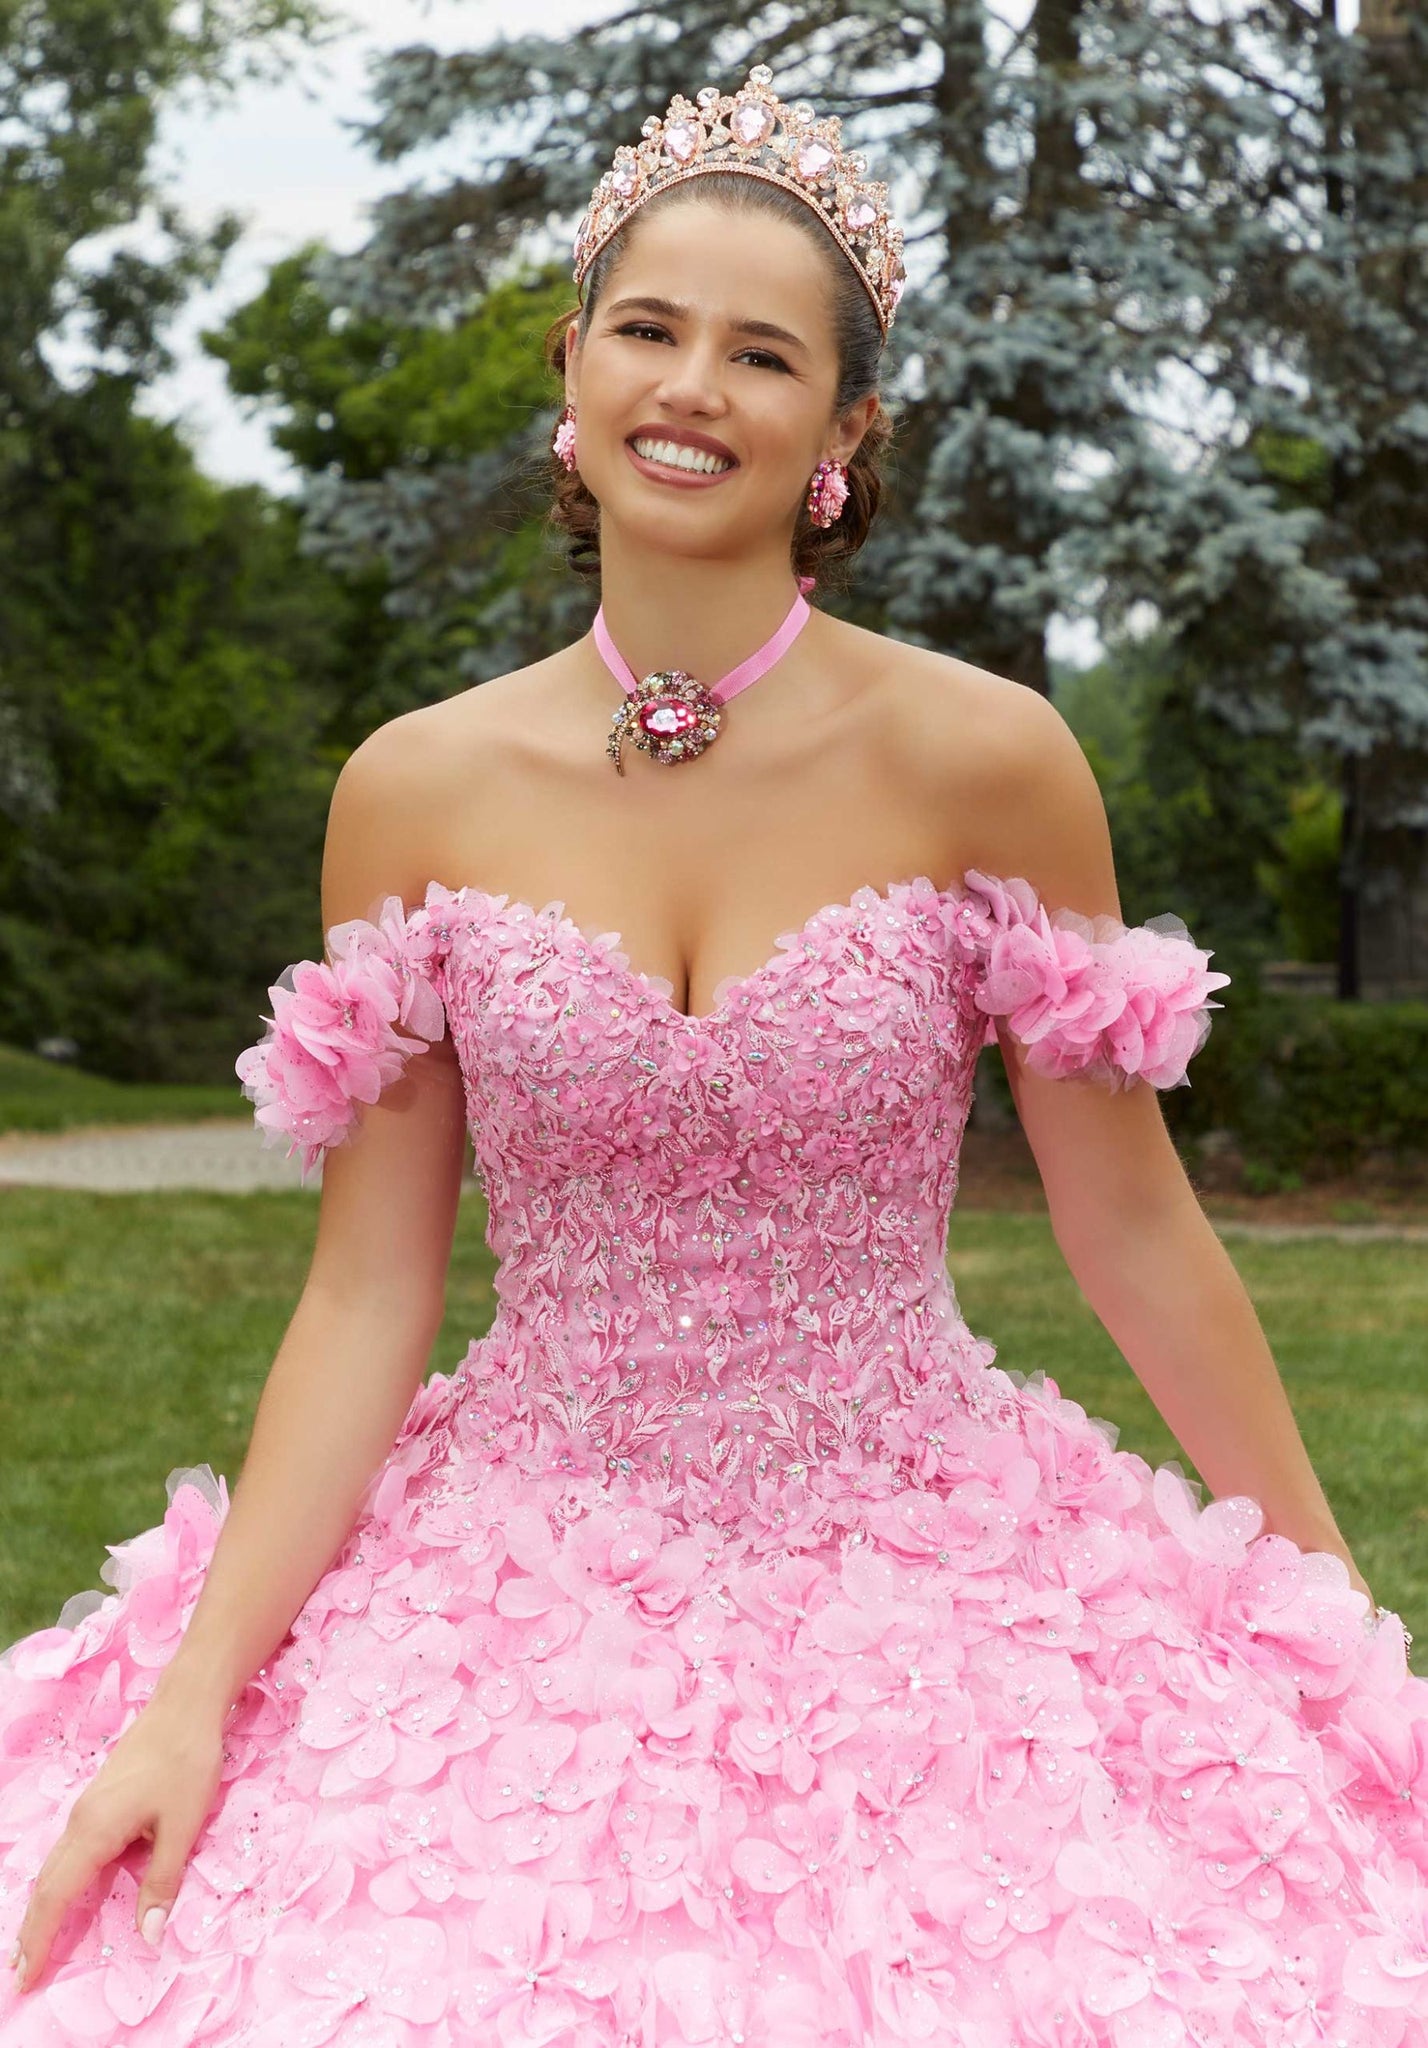 Crystal Beaded Lace Quinceañera Dress with Floral Skirt